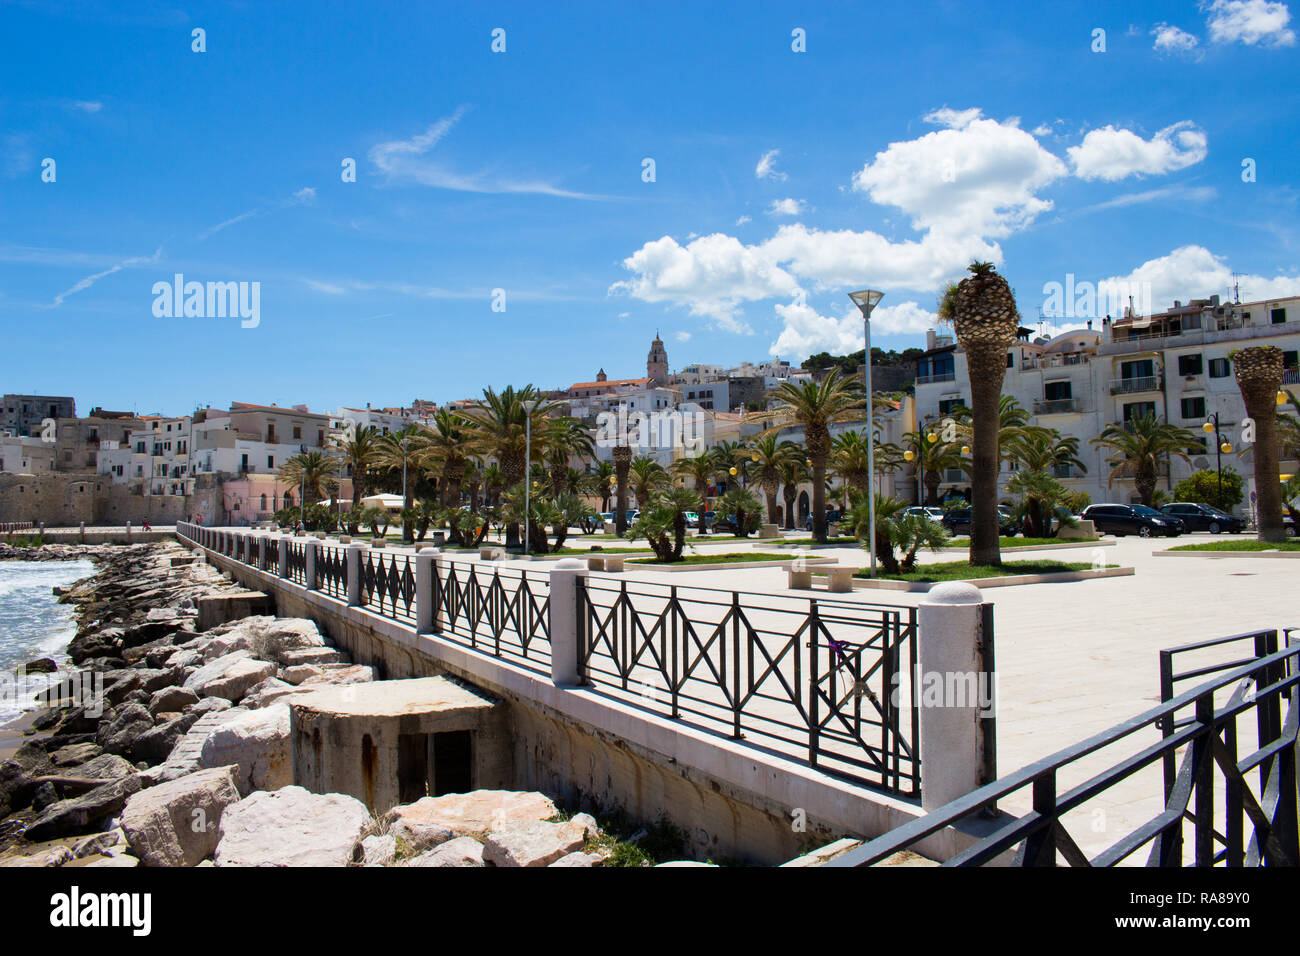 View of the square of Vieste Stock Photo